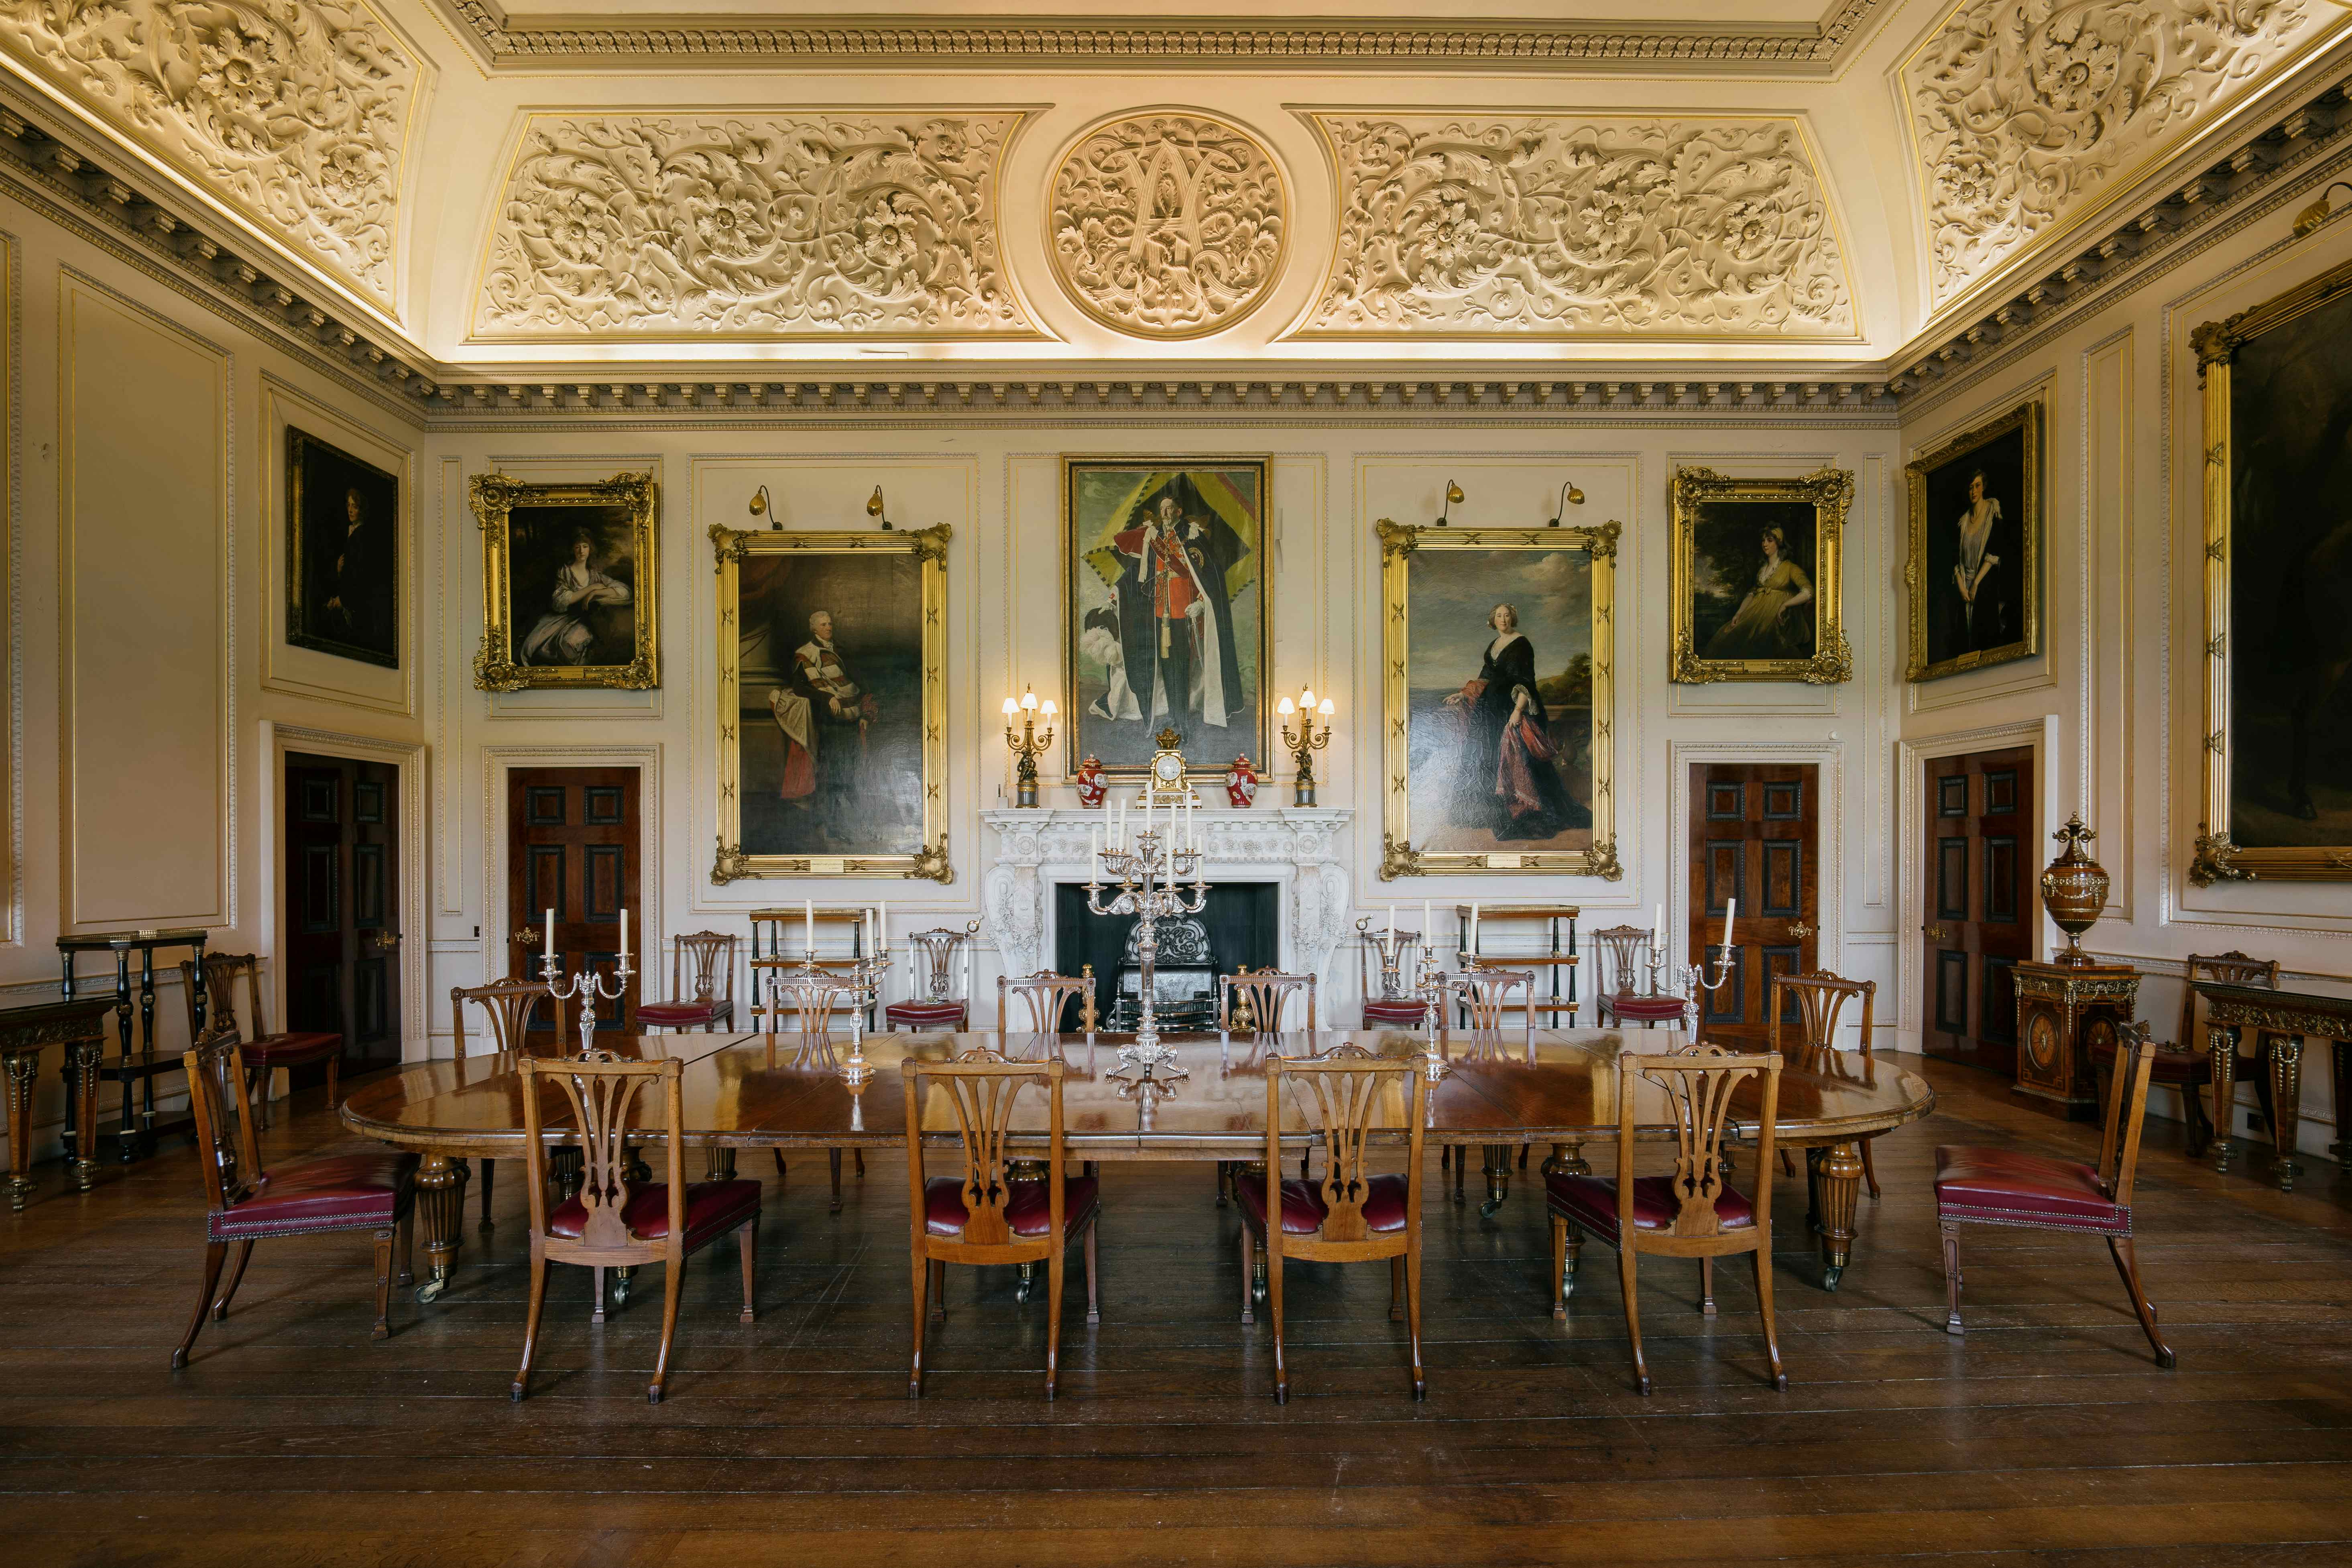 The State Dining Room, Harewood House